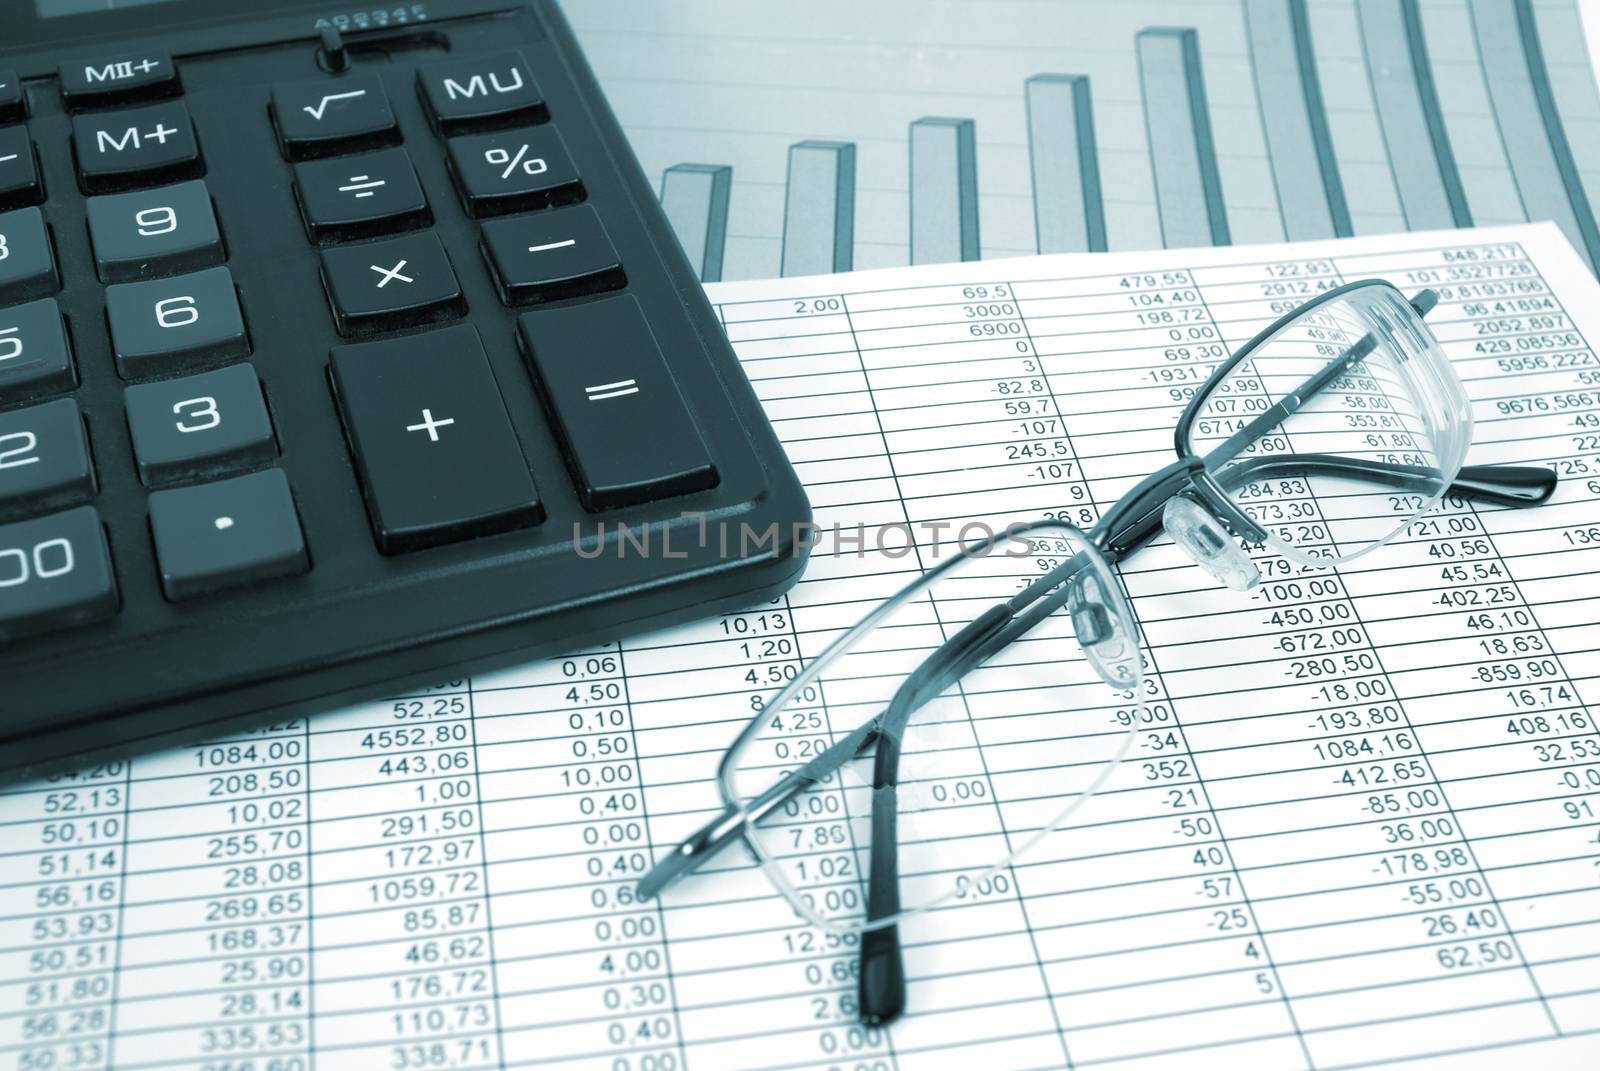 Glasses and calculator on paper table with finance diagram